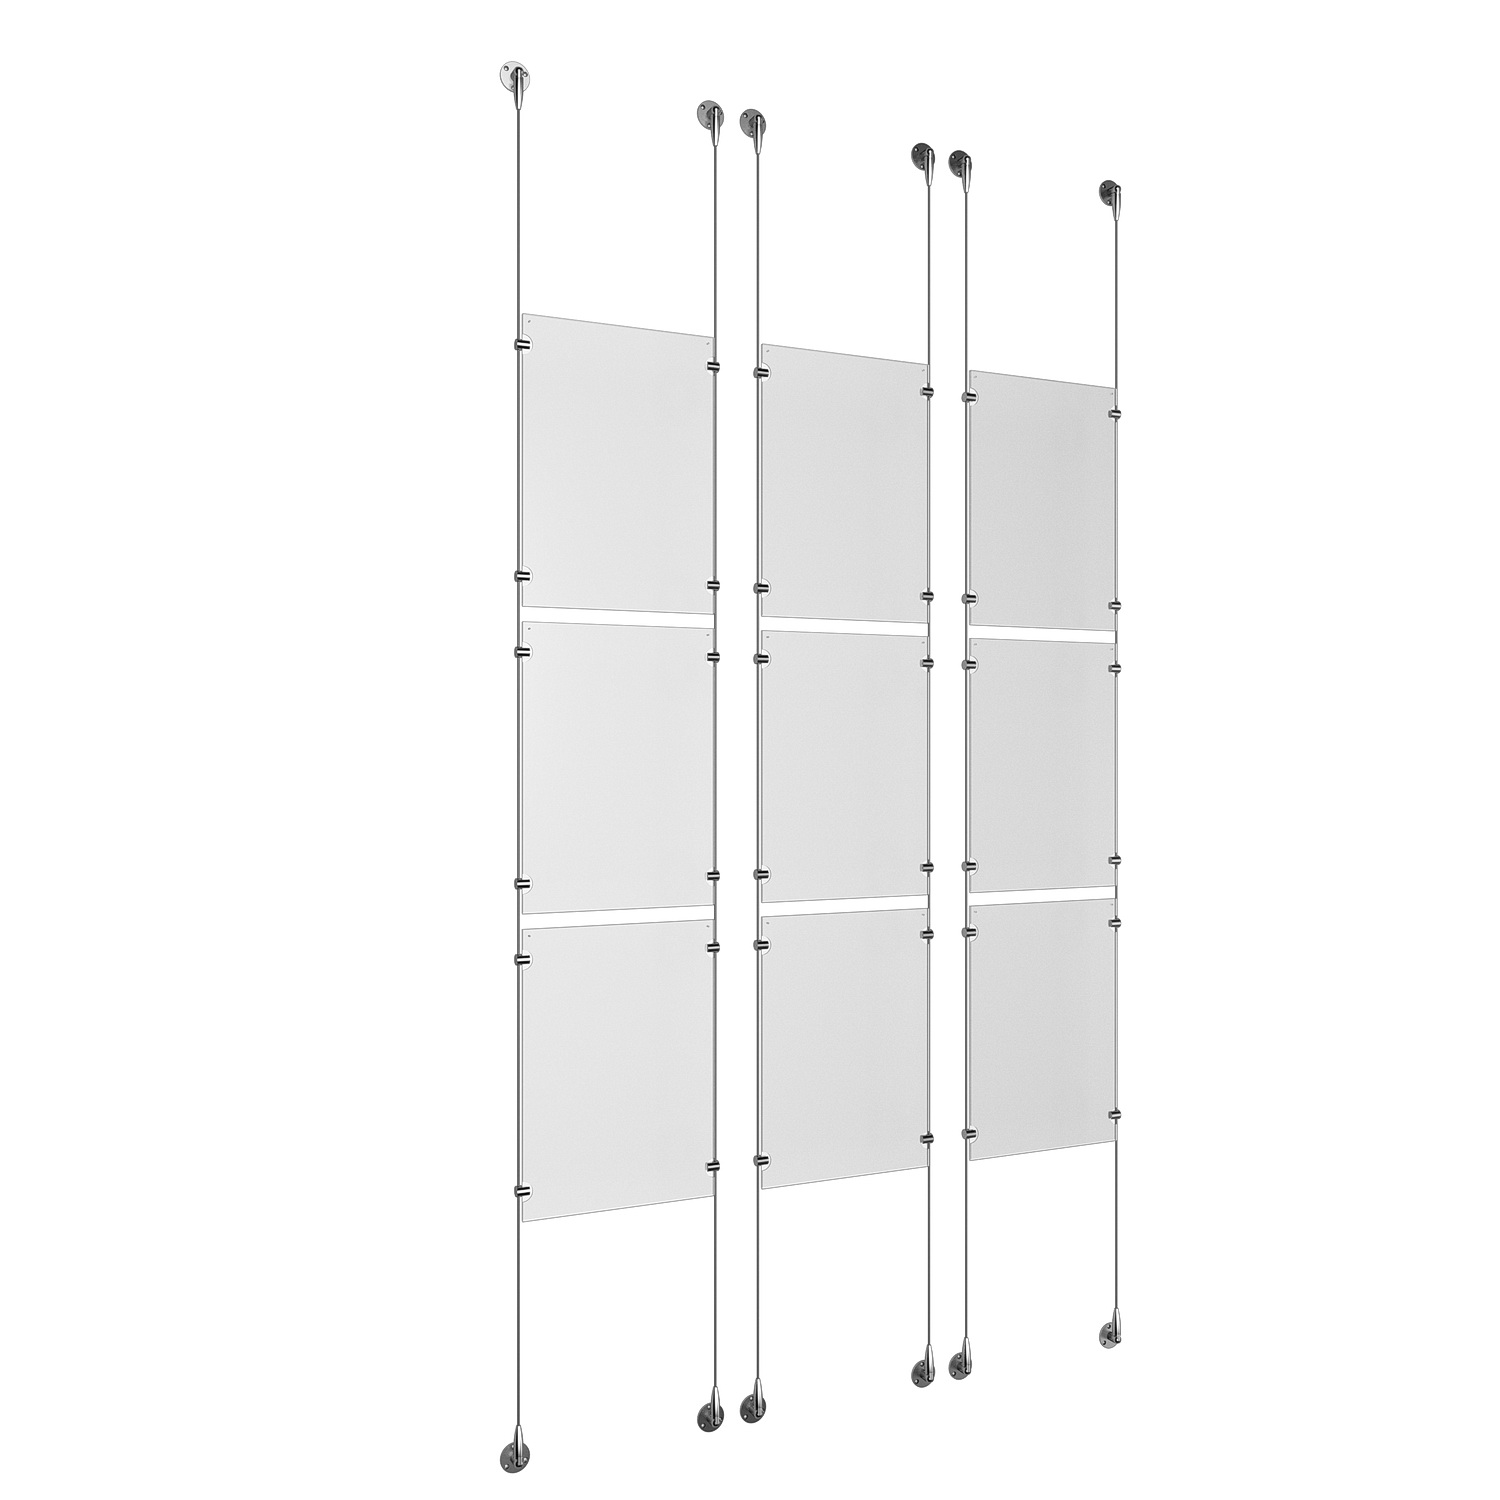 (9) 11'' Width x 17'' Height Clear Acrylic Frame & (6) Stainless Steel Satin Brushed Adjustable Angle Signature 1/8'' Cable Systems with (36) Single-Sided Panel Grippers